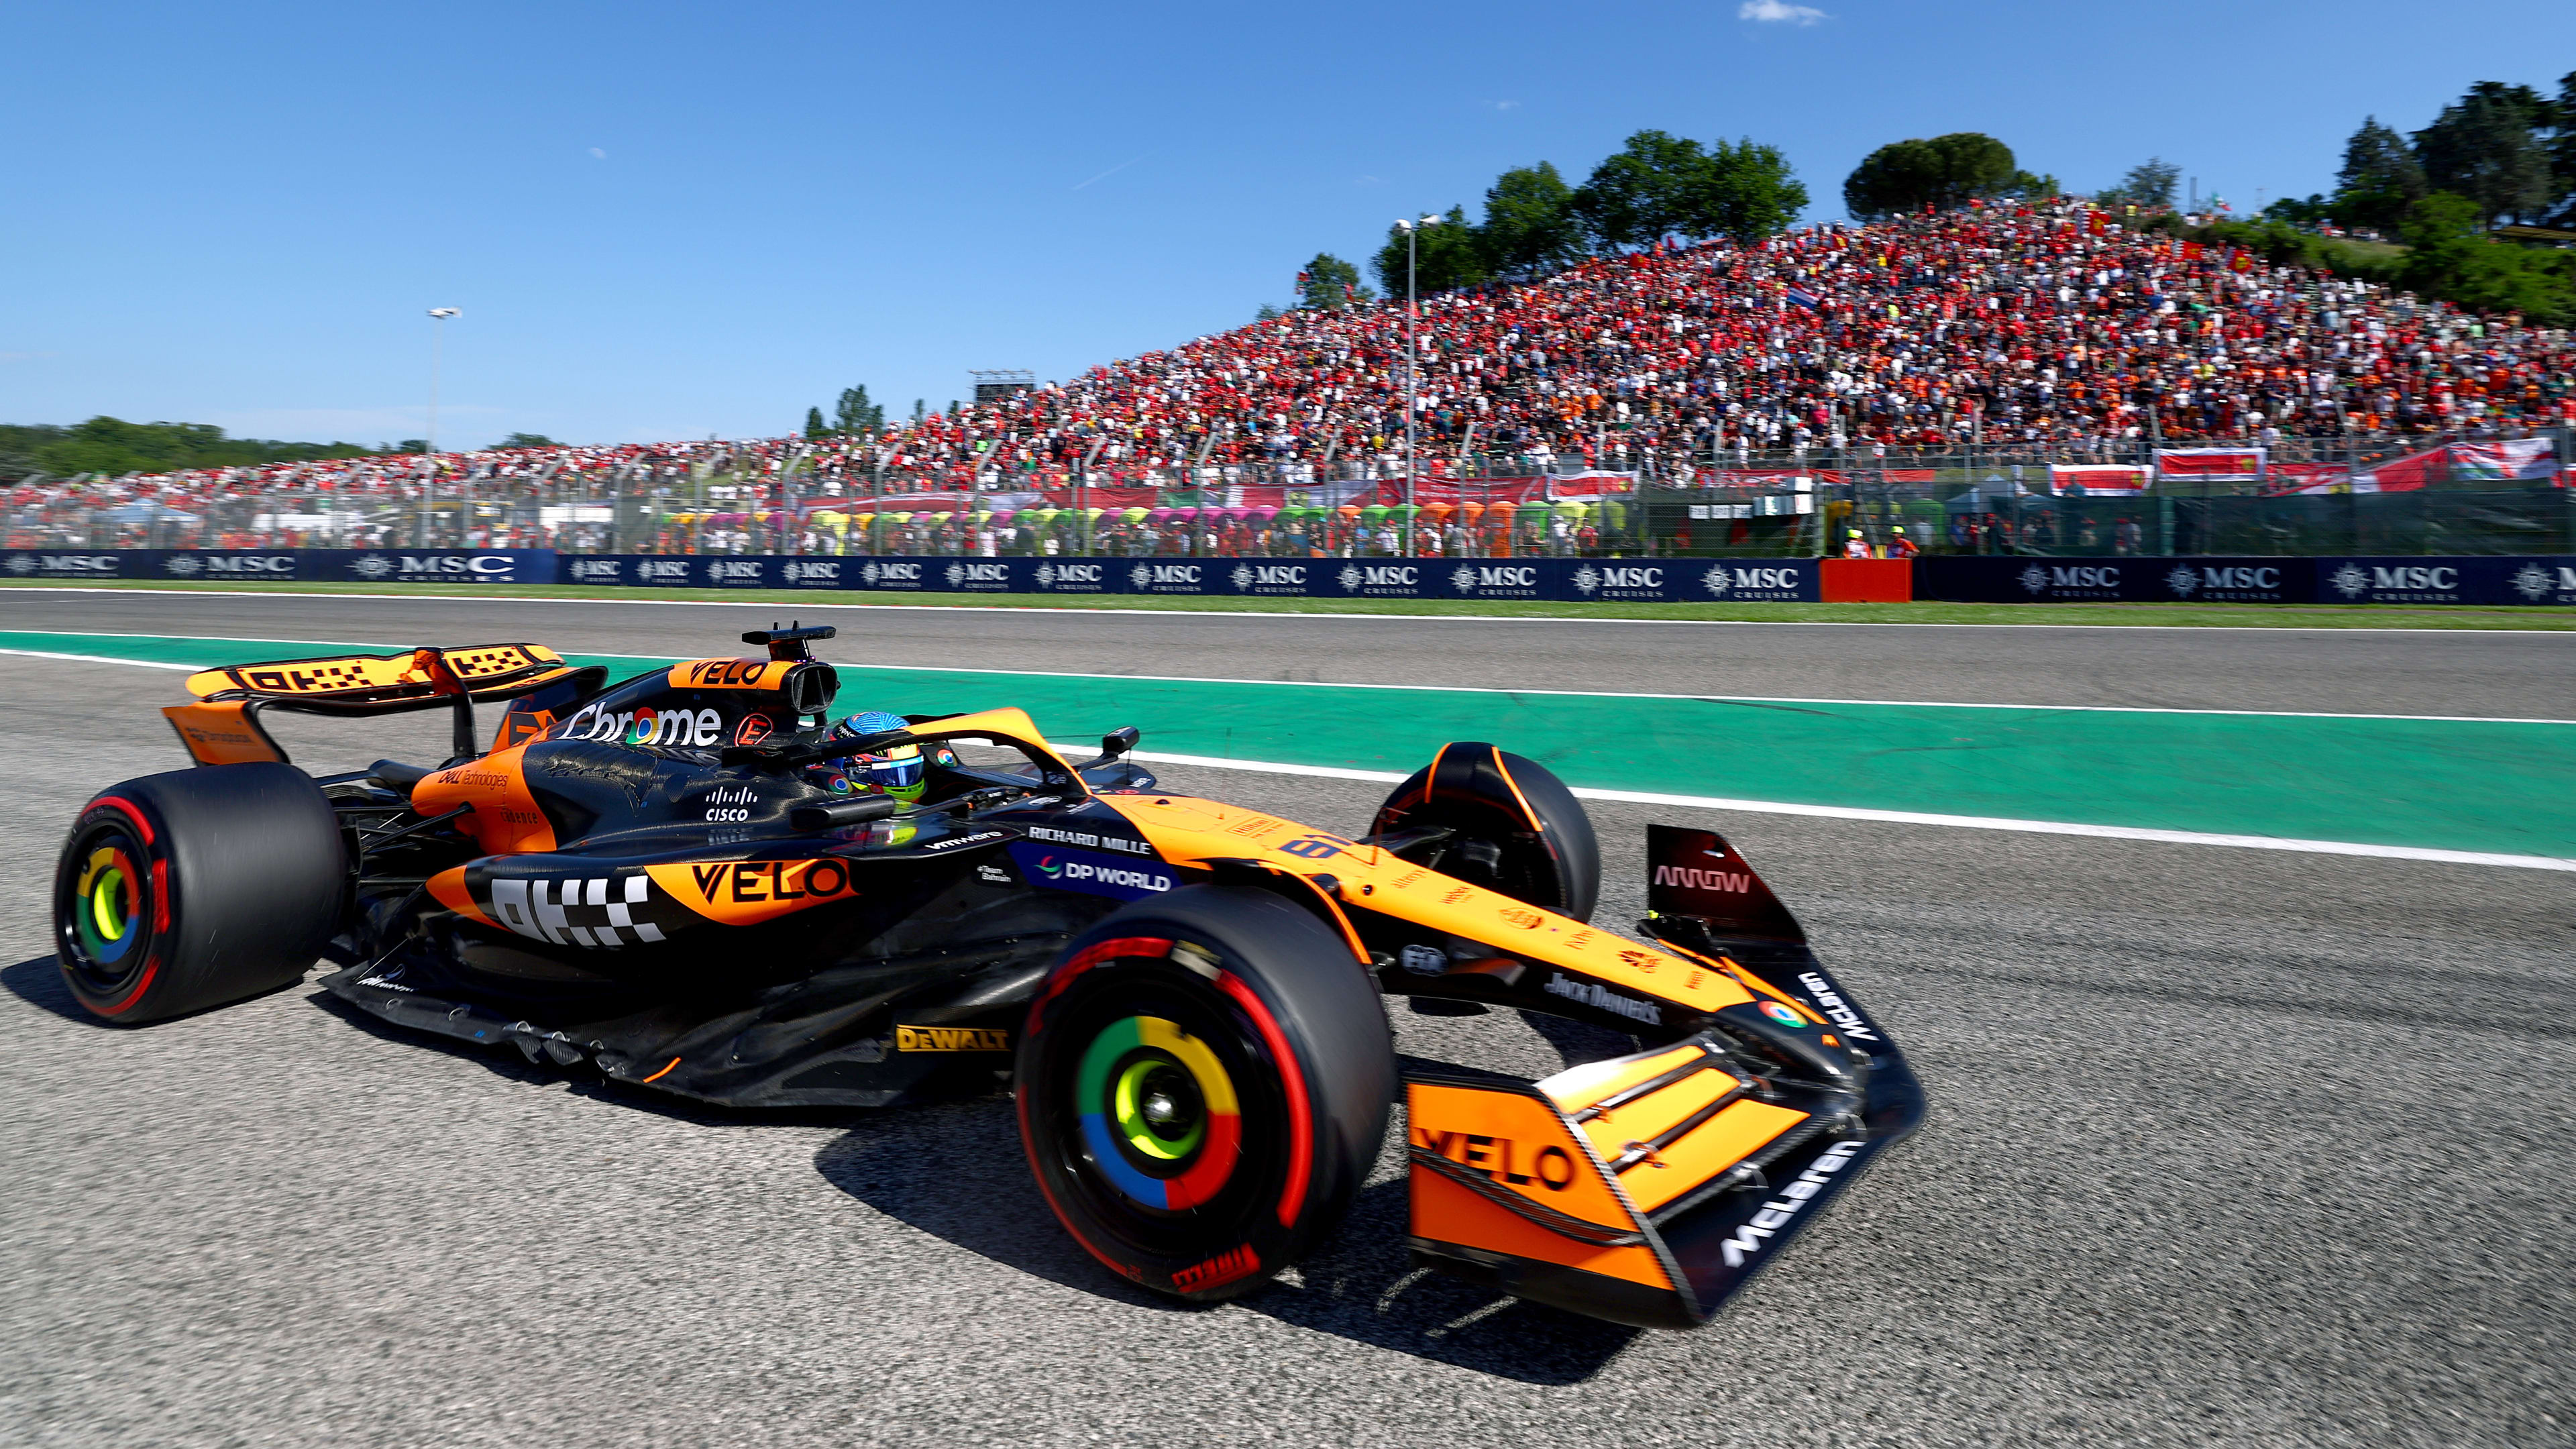 LIVE COVERAGE: Follow all the action from the 2024 Emilia-Romagna Grand Prix